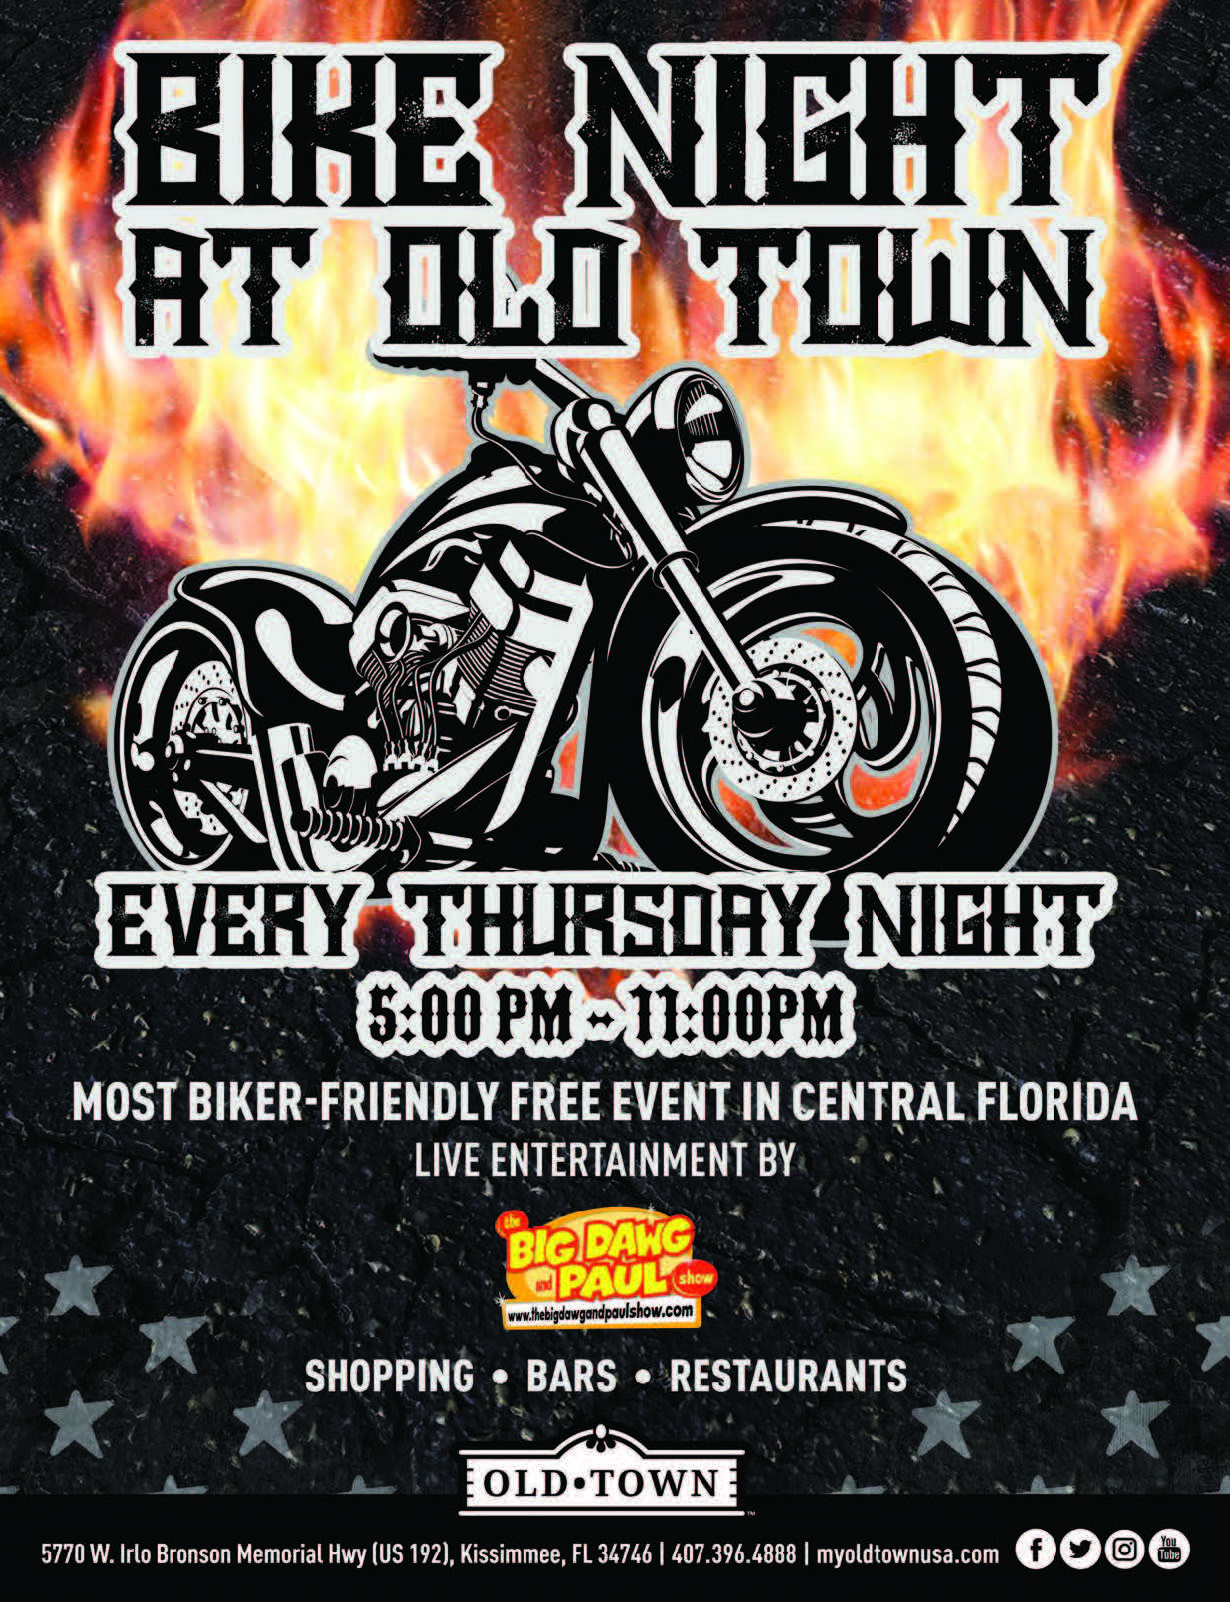 Born To Ride Motorcycle Events Calendar | Born To Ride Motorcycle Magazine ...1230 x 1602